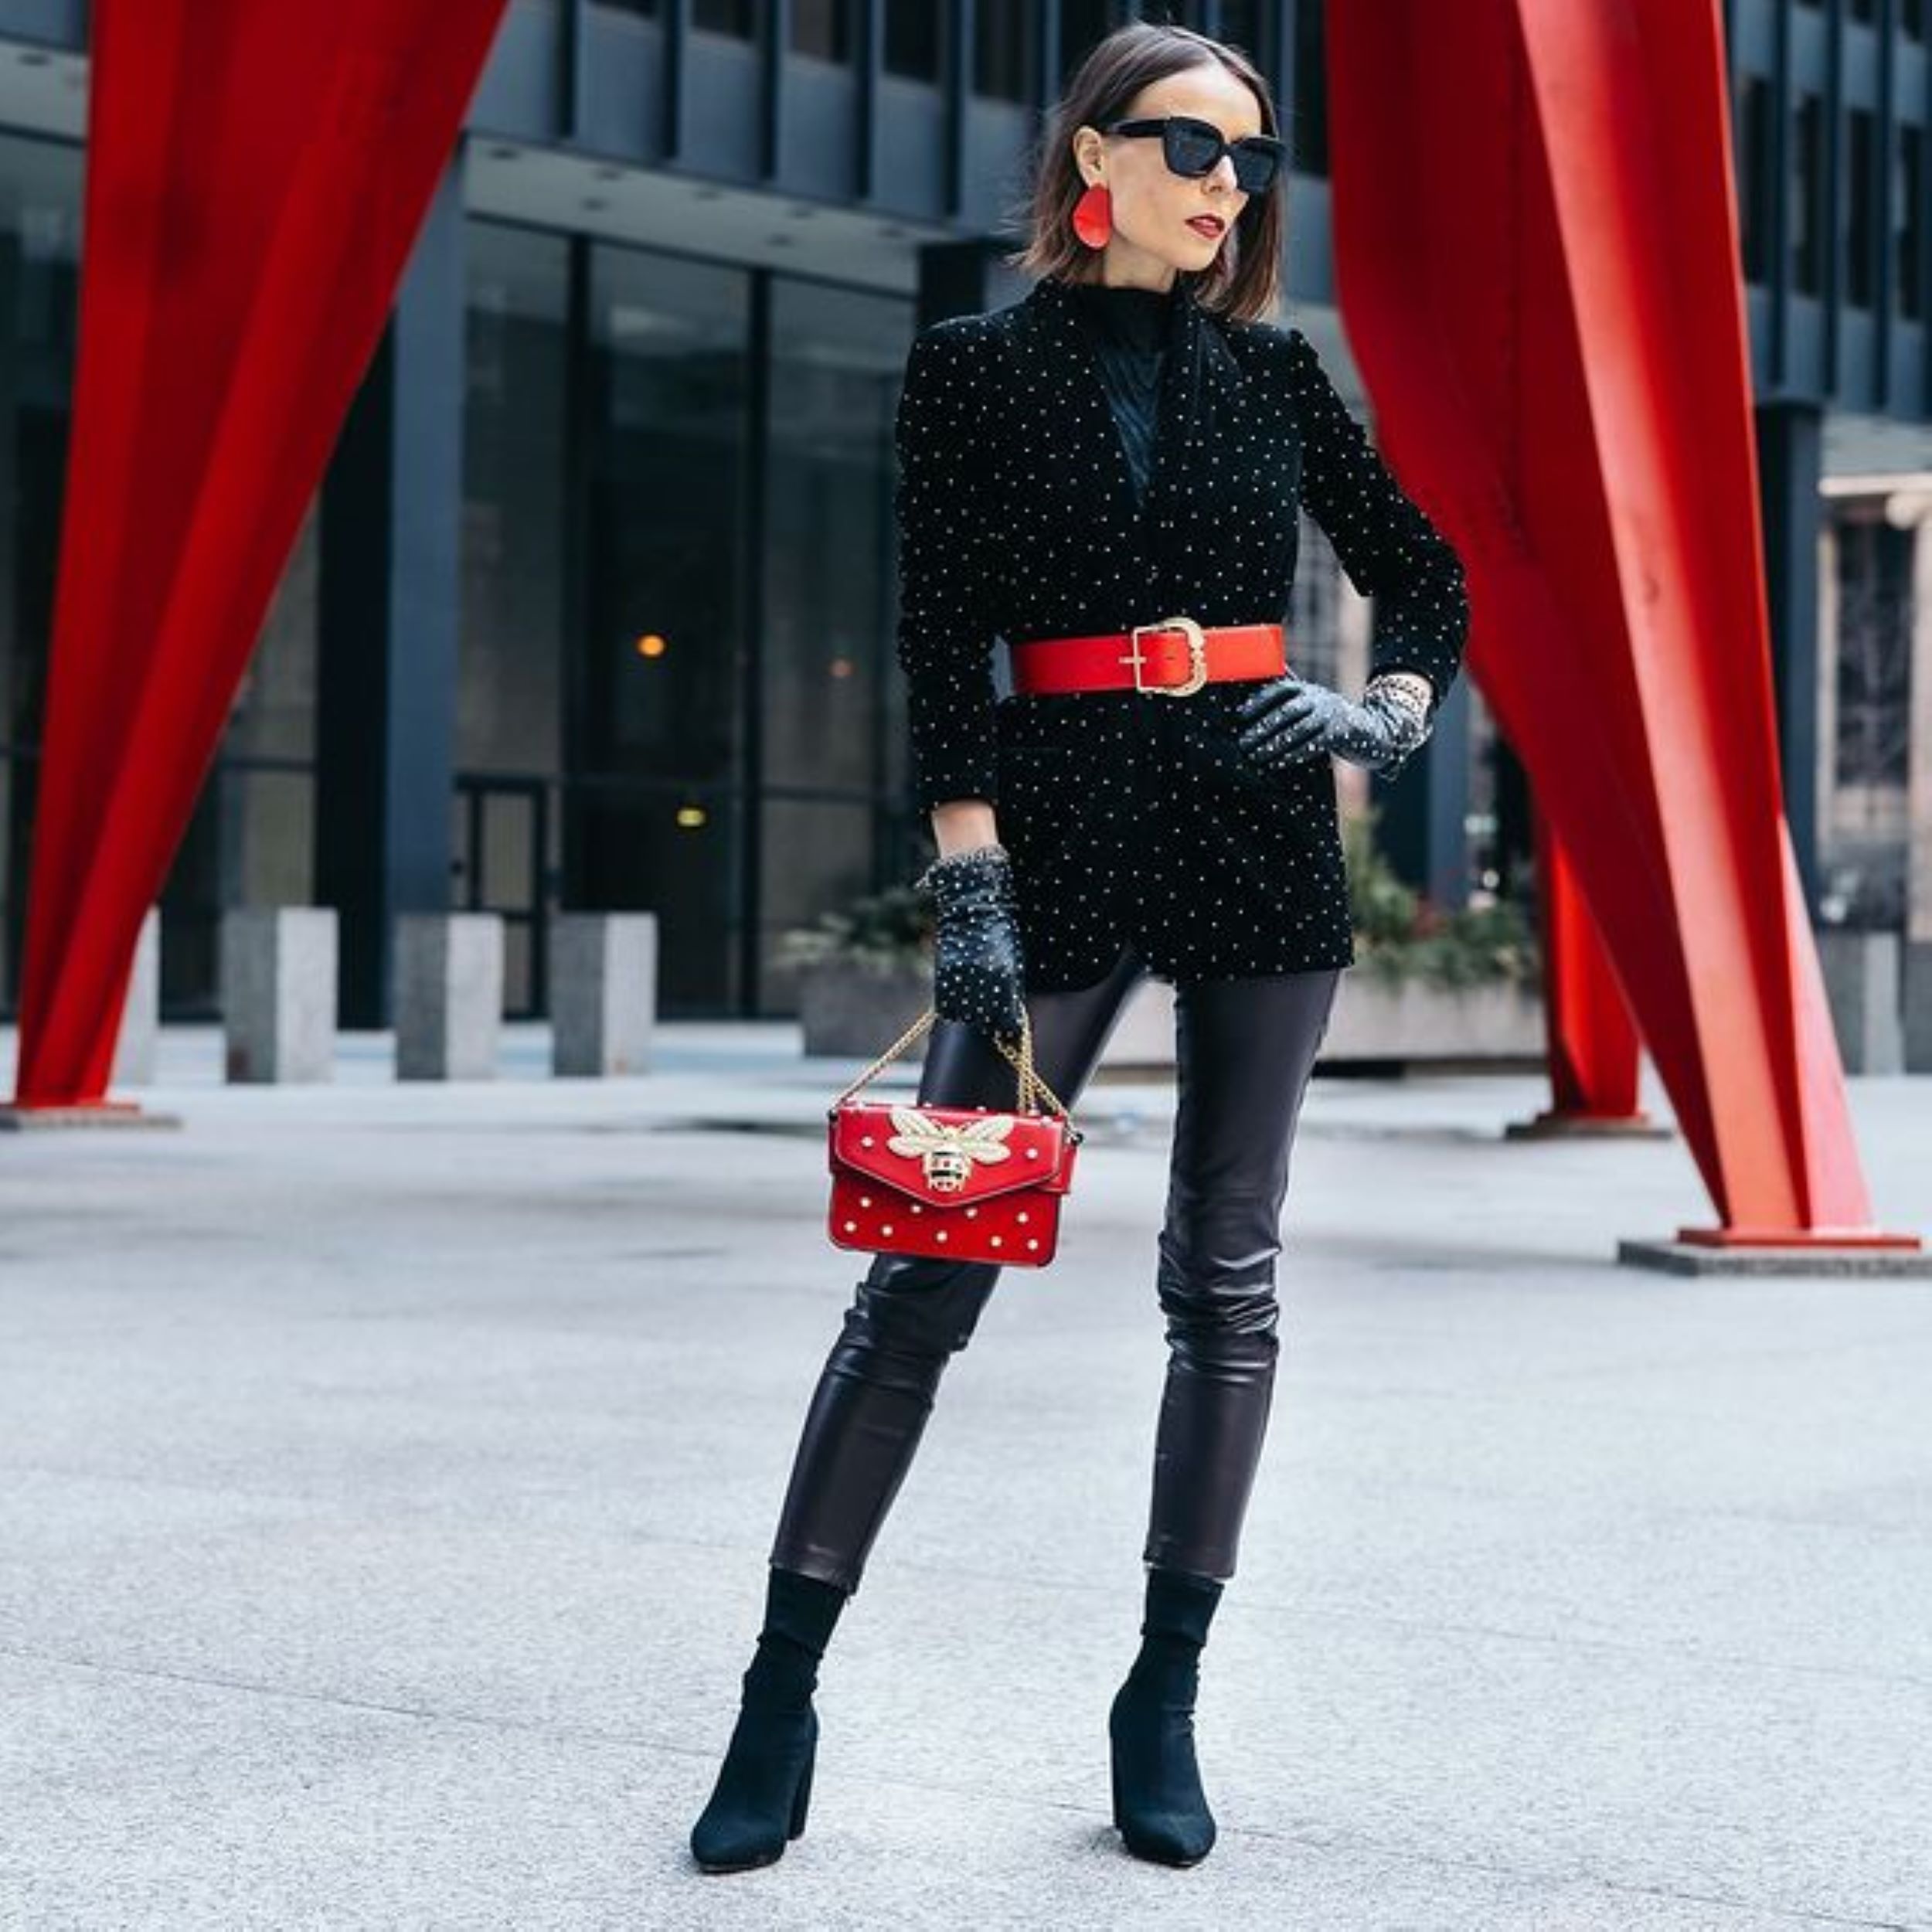 Chic woman in a black sparkly coat with a red waist belt and a small red purse